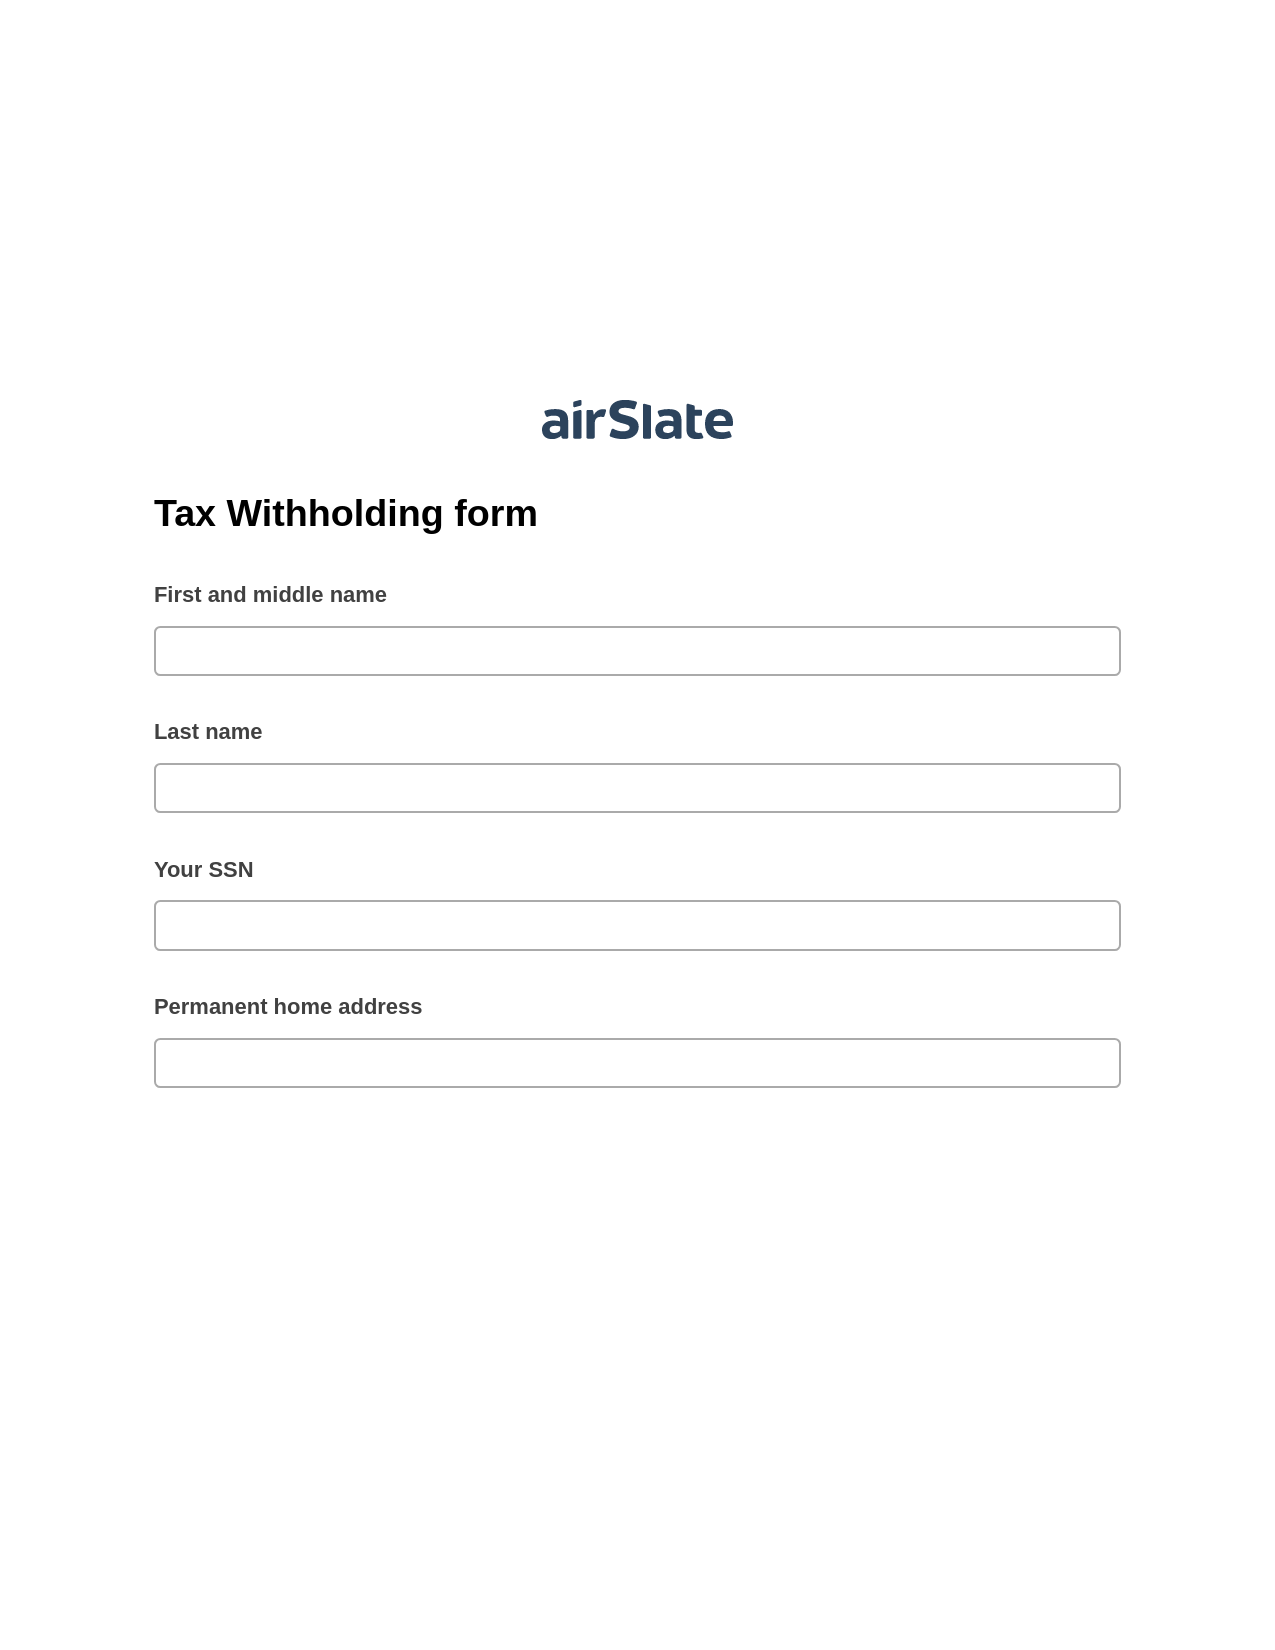 Multirole Tax Withholding form Pre-fill from CSV File Bot, SendGrid Send Campaign Bot, Export to Excel 365 Bot